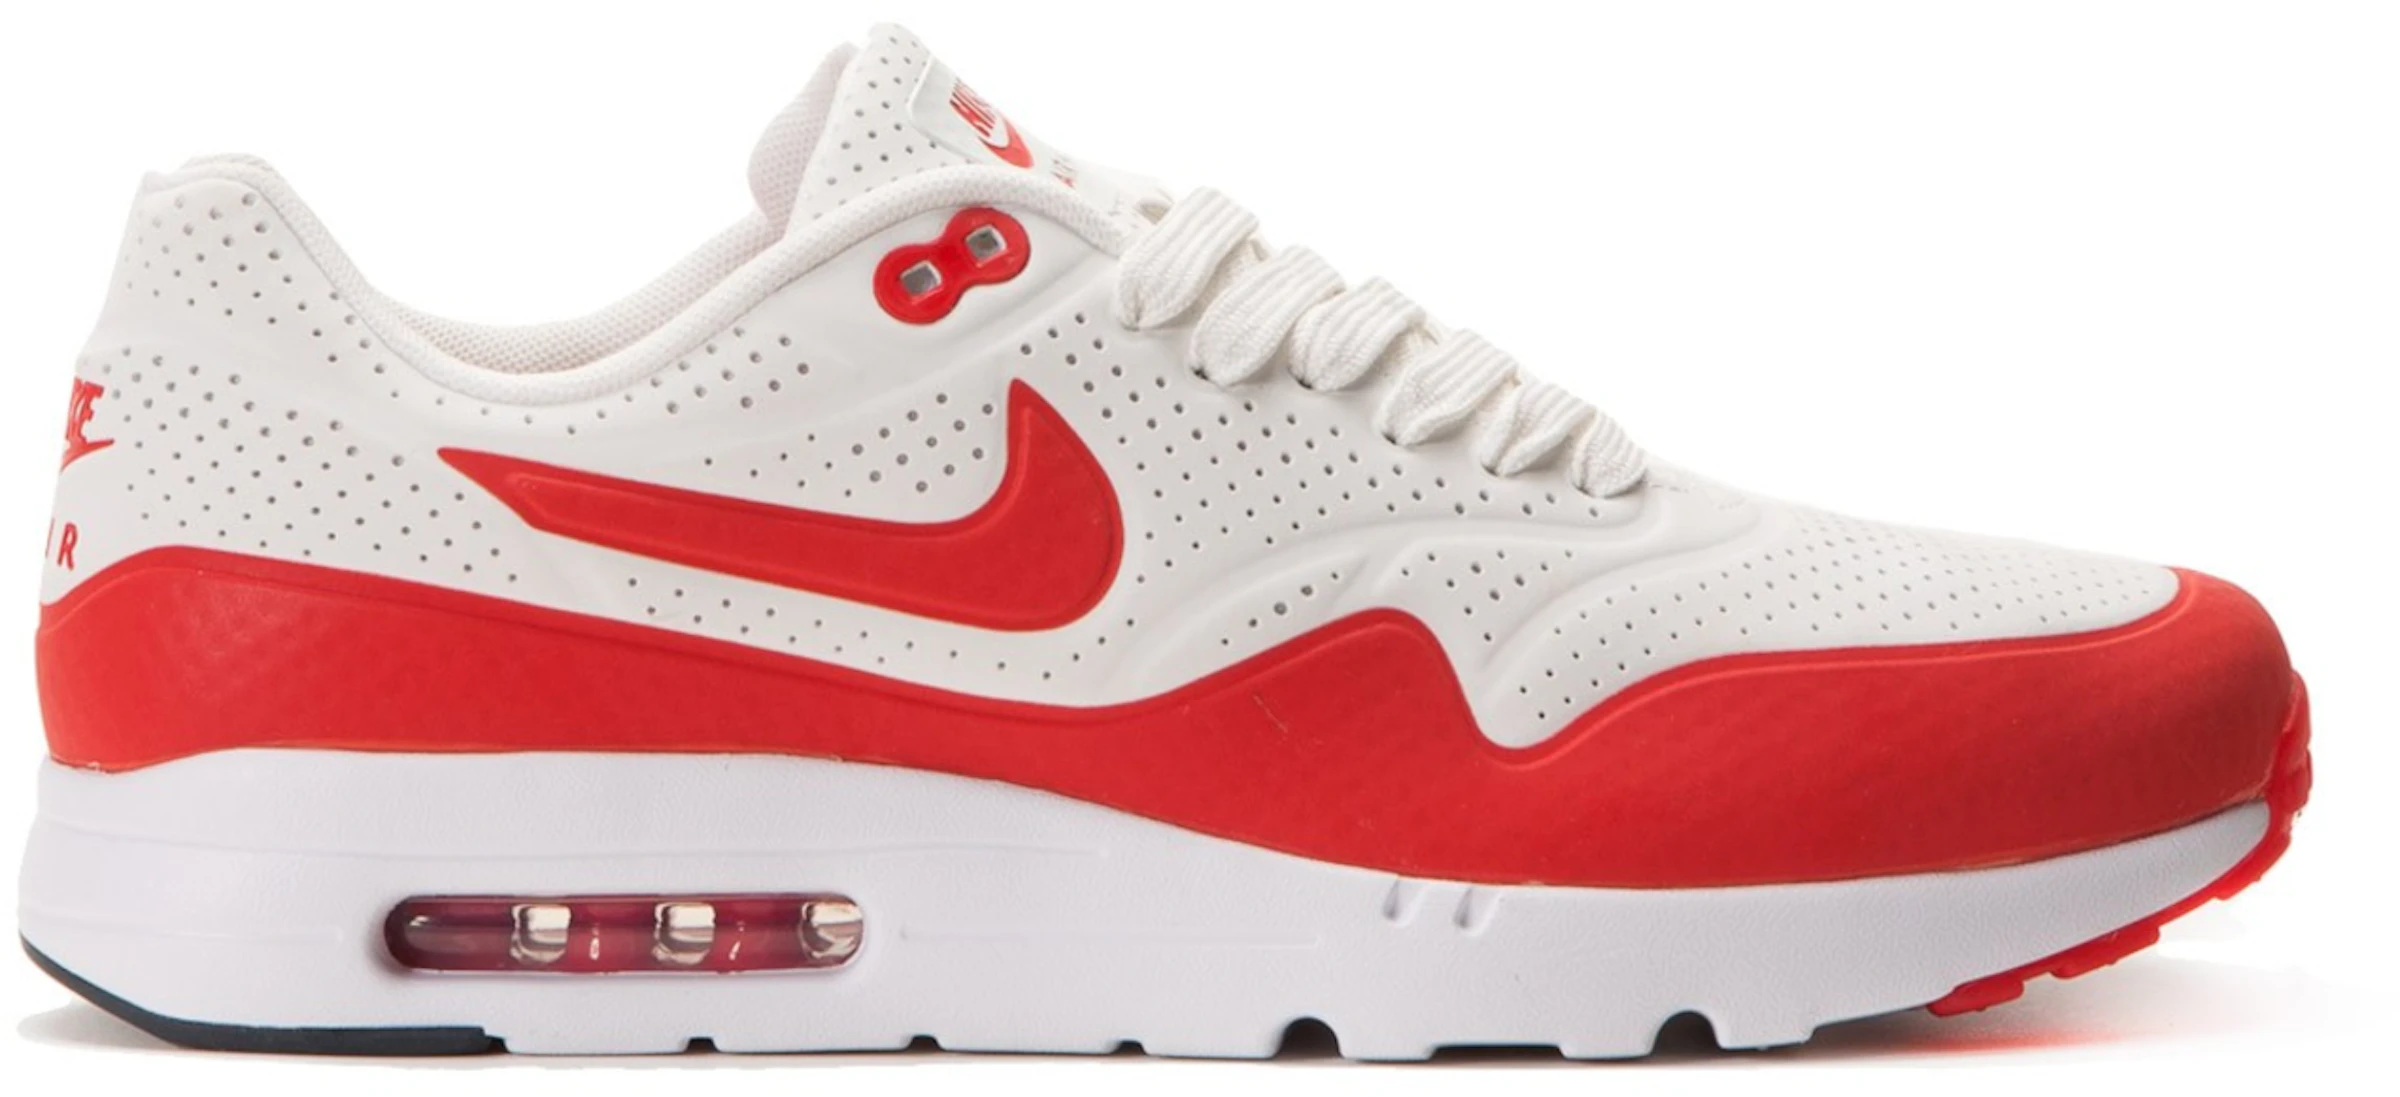 Nike Air Max 1 Ultra Moire Challenge Red - 705297-106 -